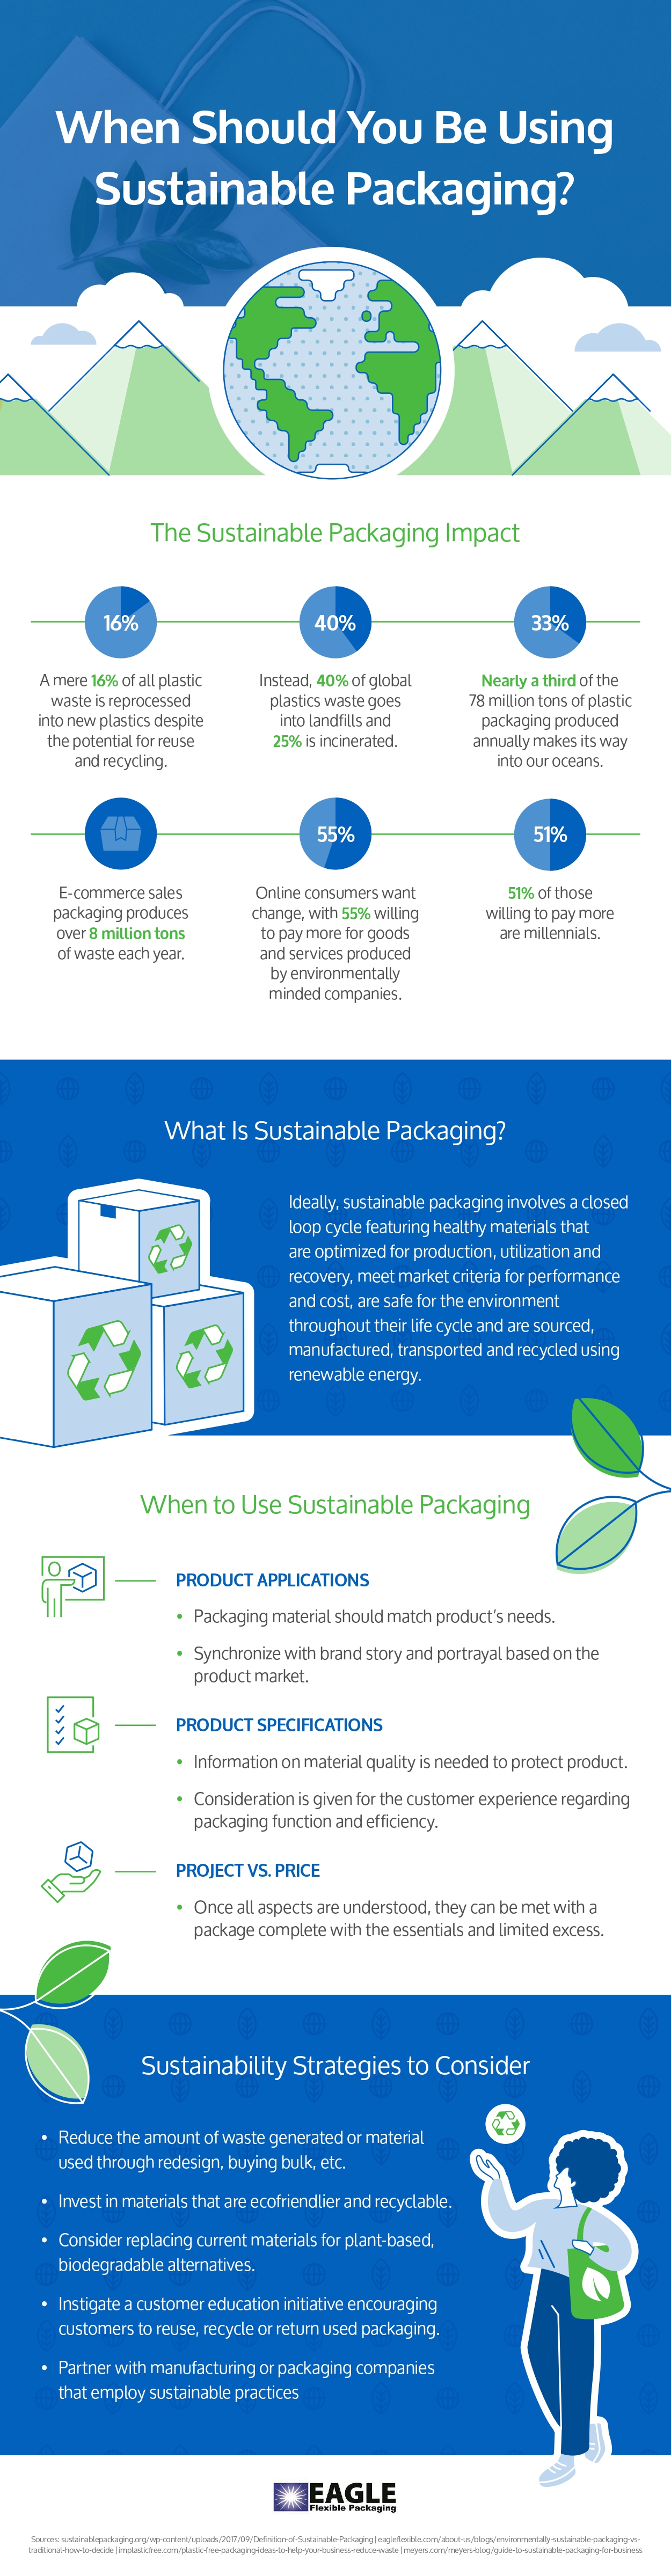 flexible packaging products